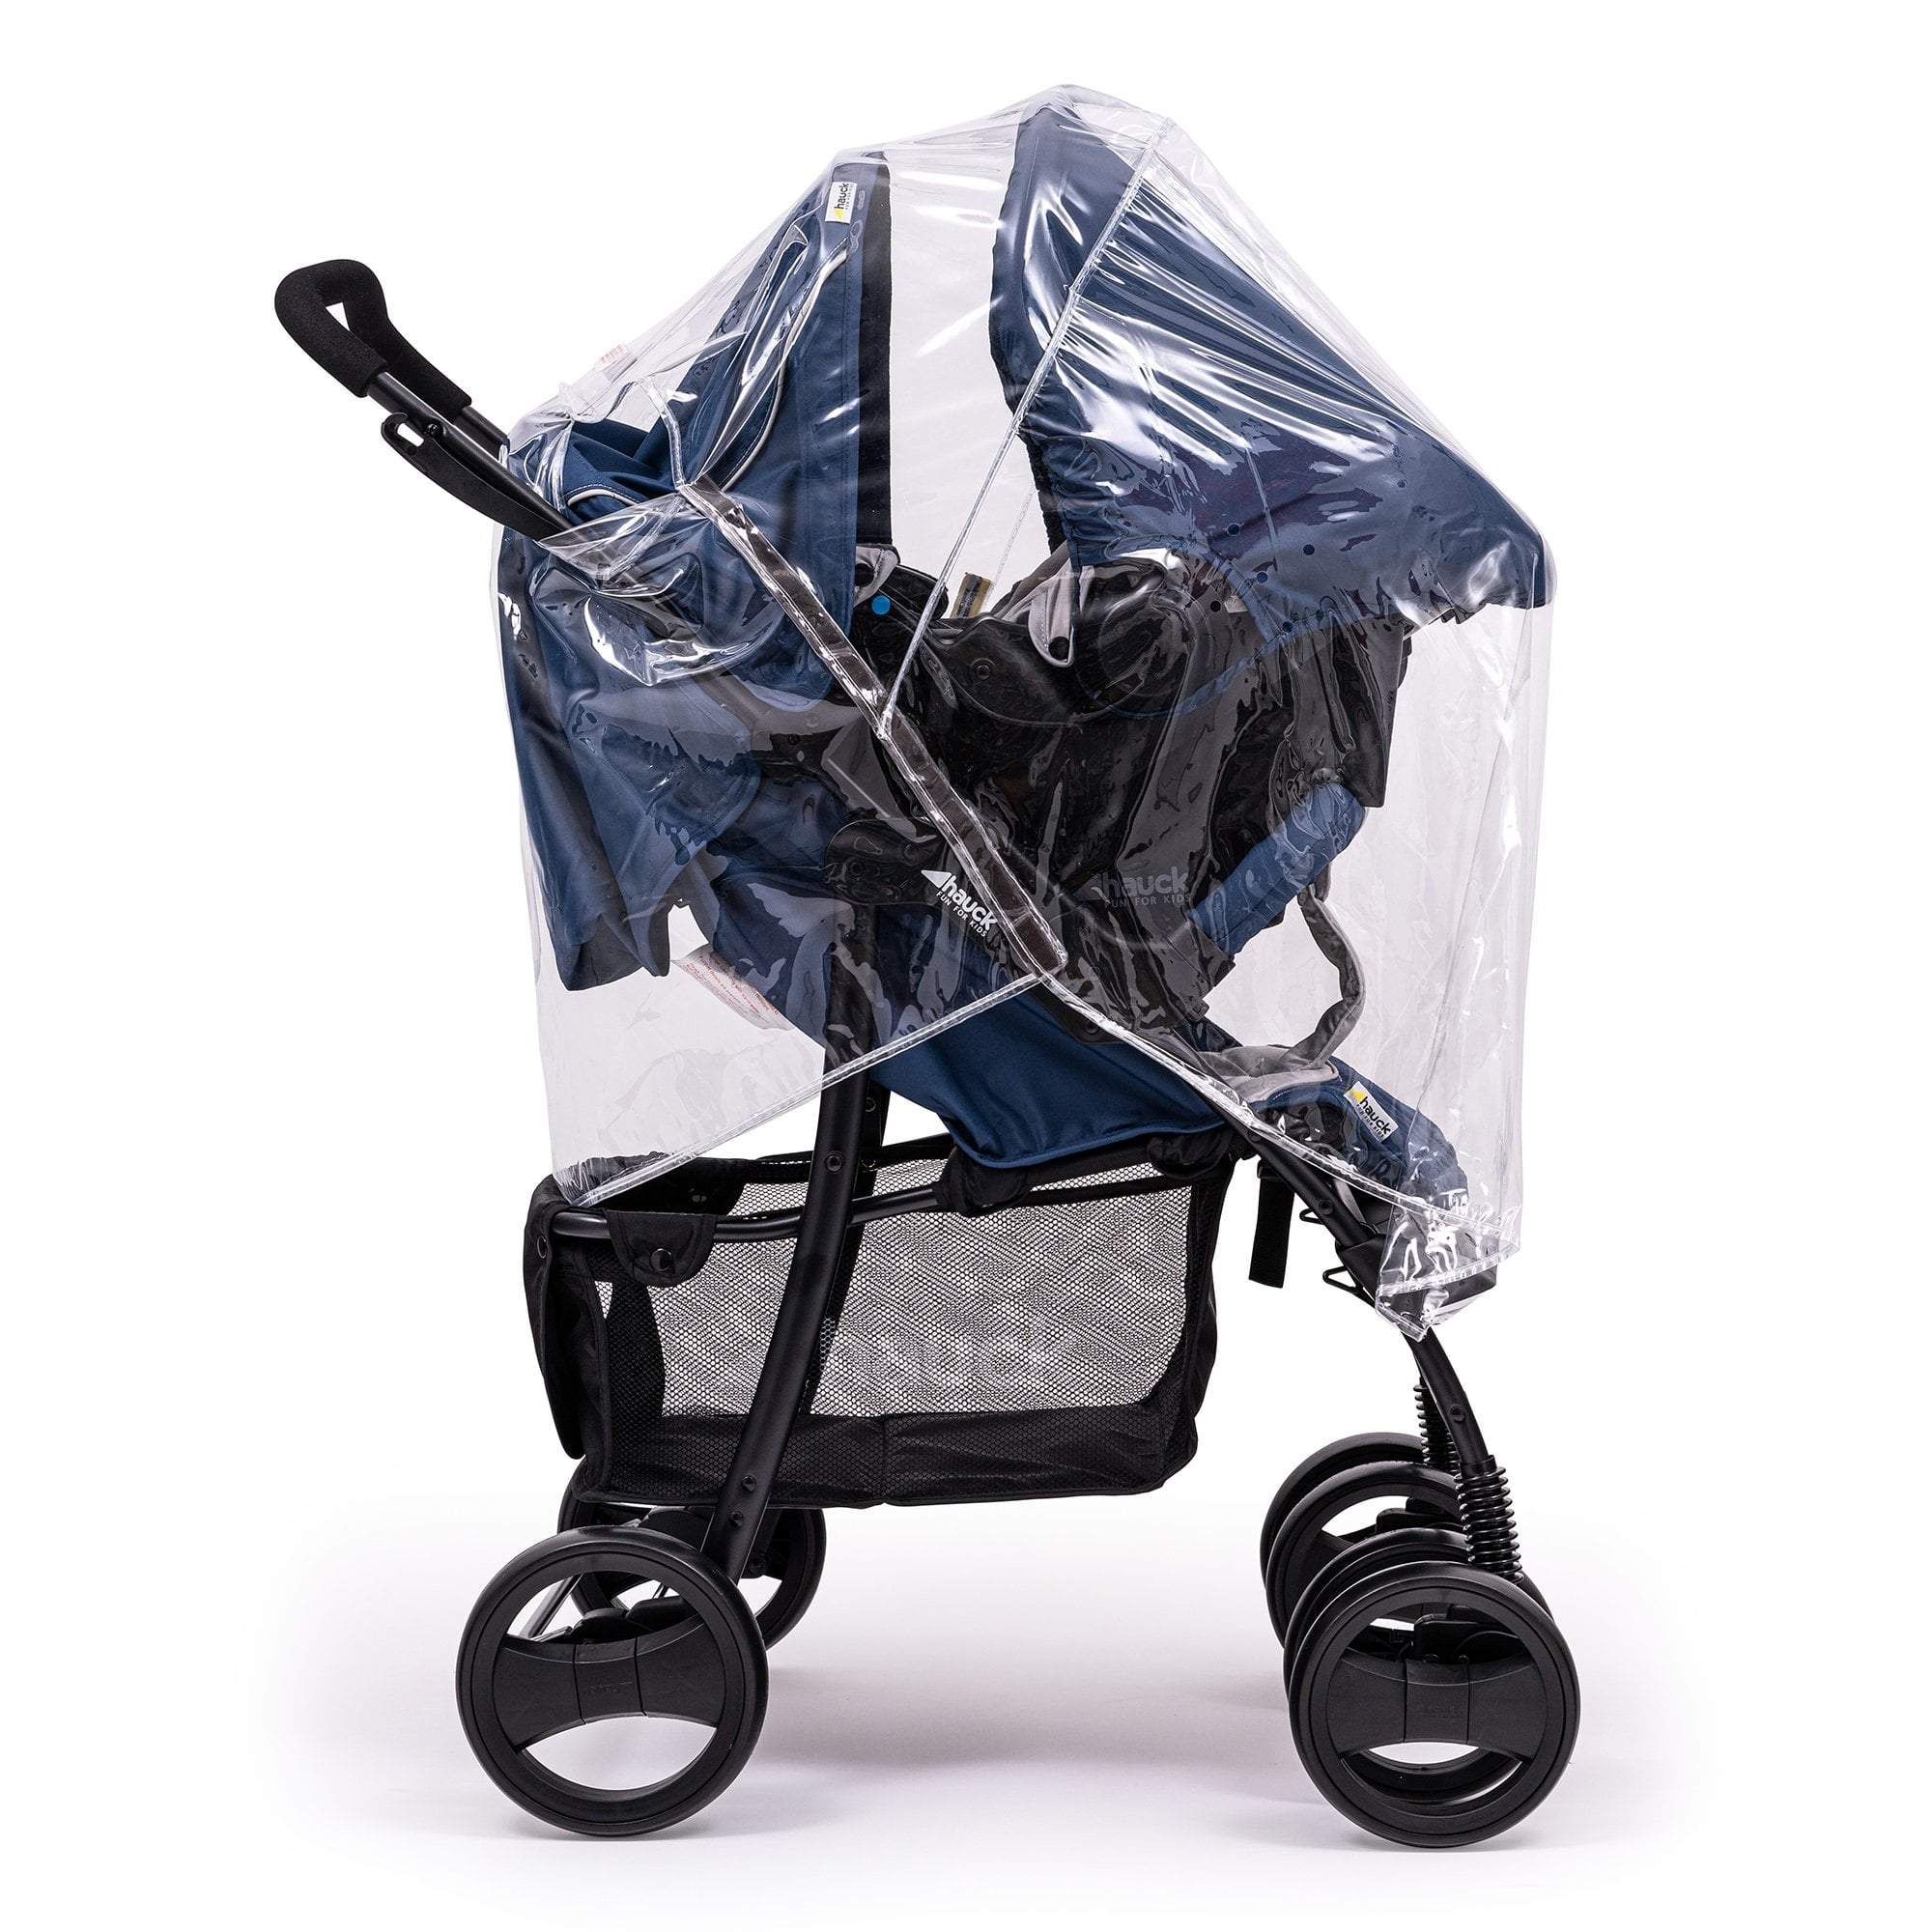 Travel System Raincover Compatible with Kids Kargo - Fits All Models - For Your Little One